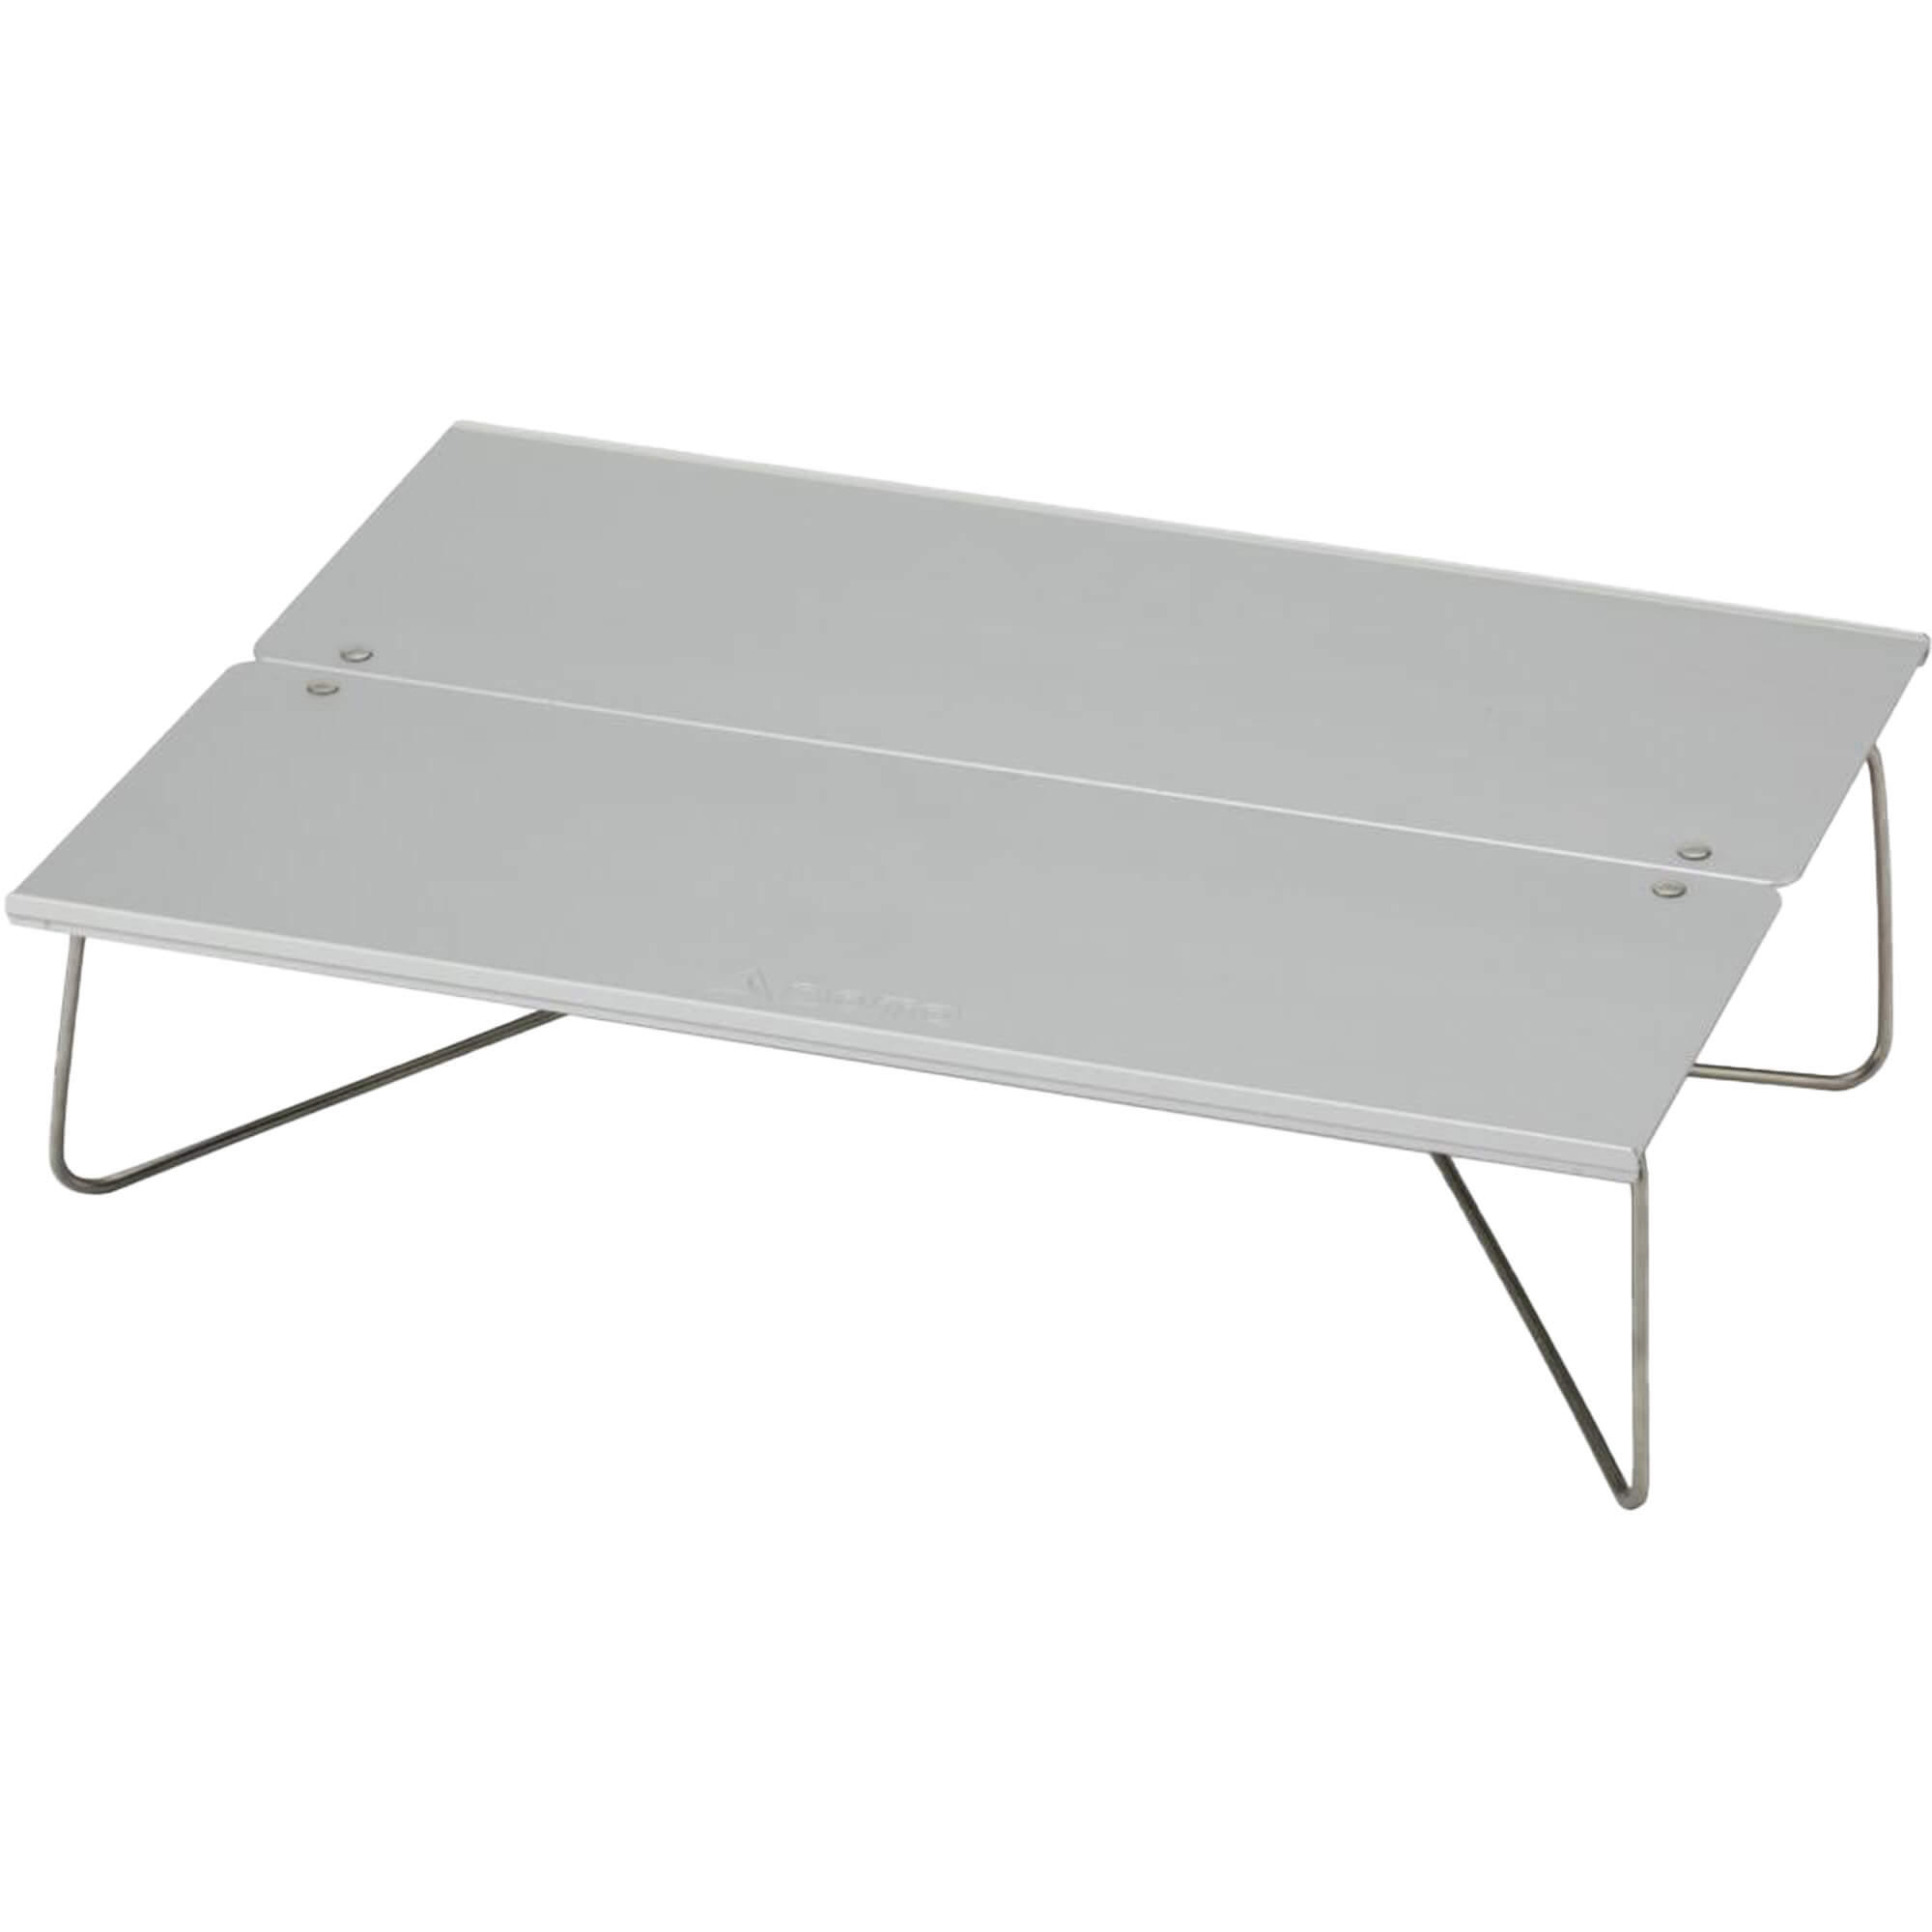 Photos - Other Camping Utensils SOTO Field Hopper Mini Pop-Up Camping Table, Grey ST-630 